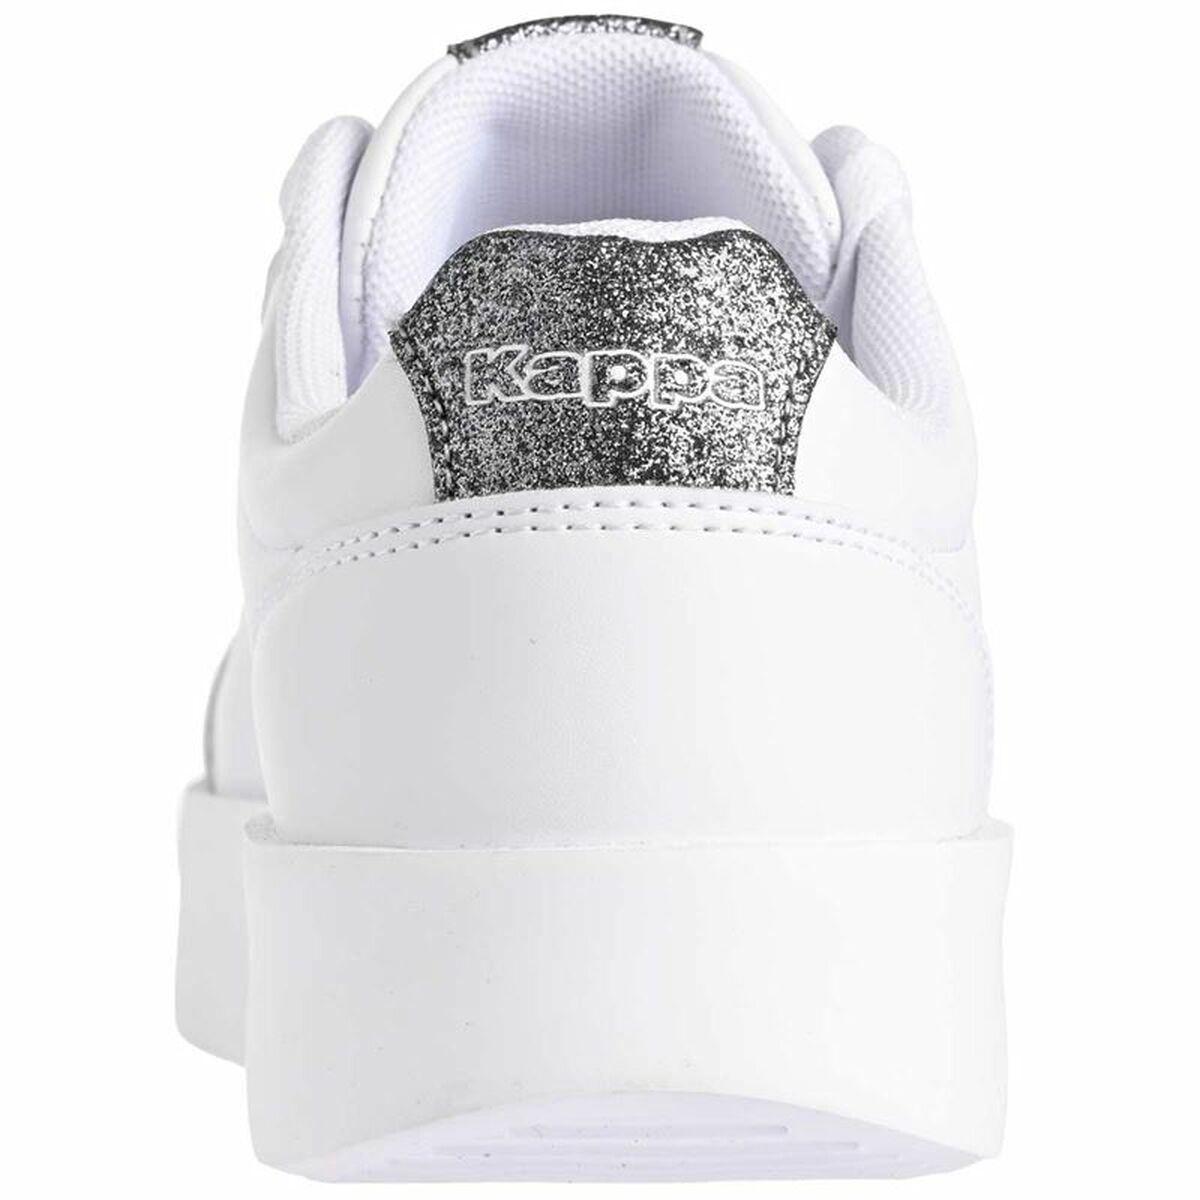 Kappa Women's Casual Trainers Lifestyle Amelia White | Lyst